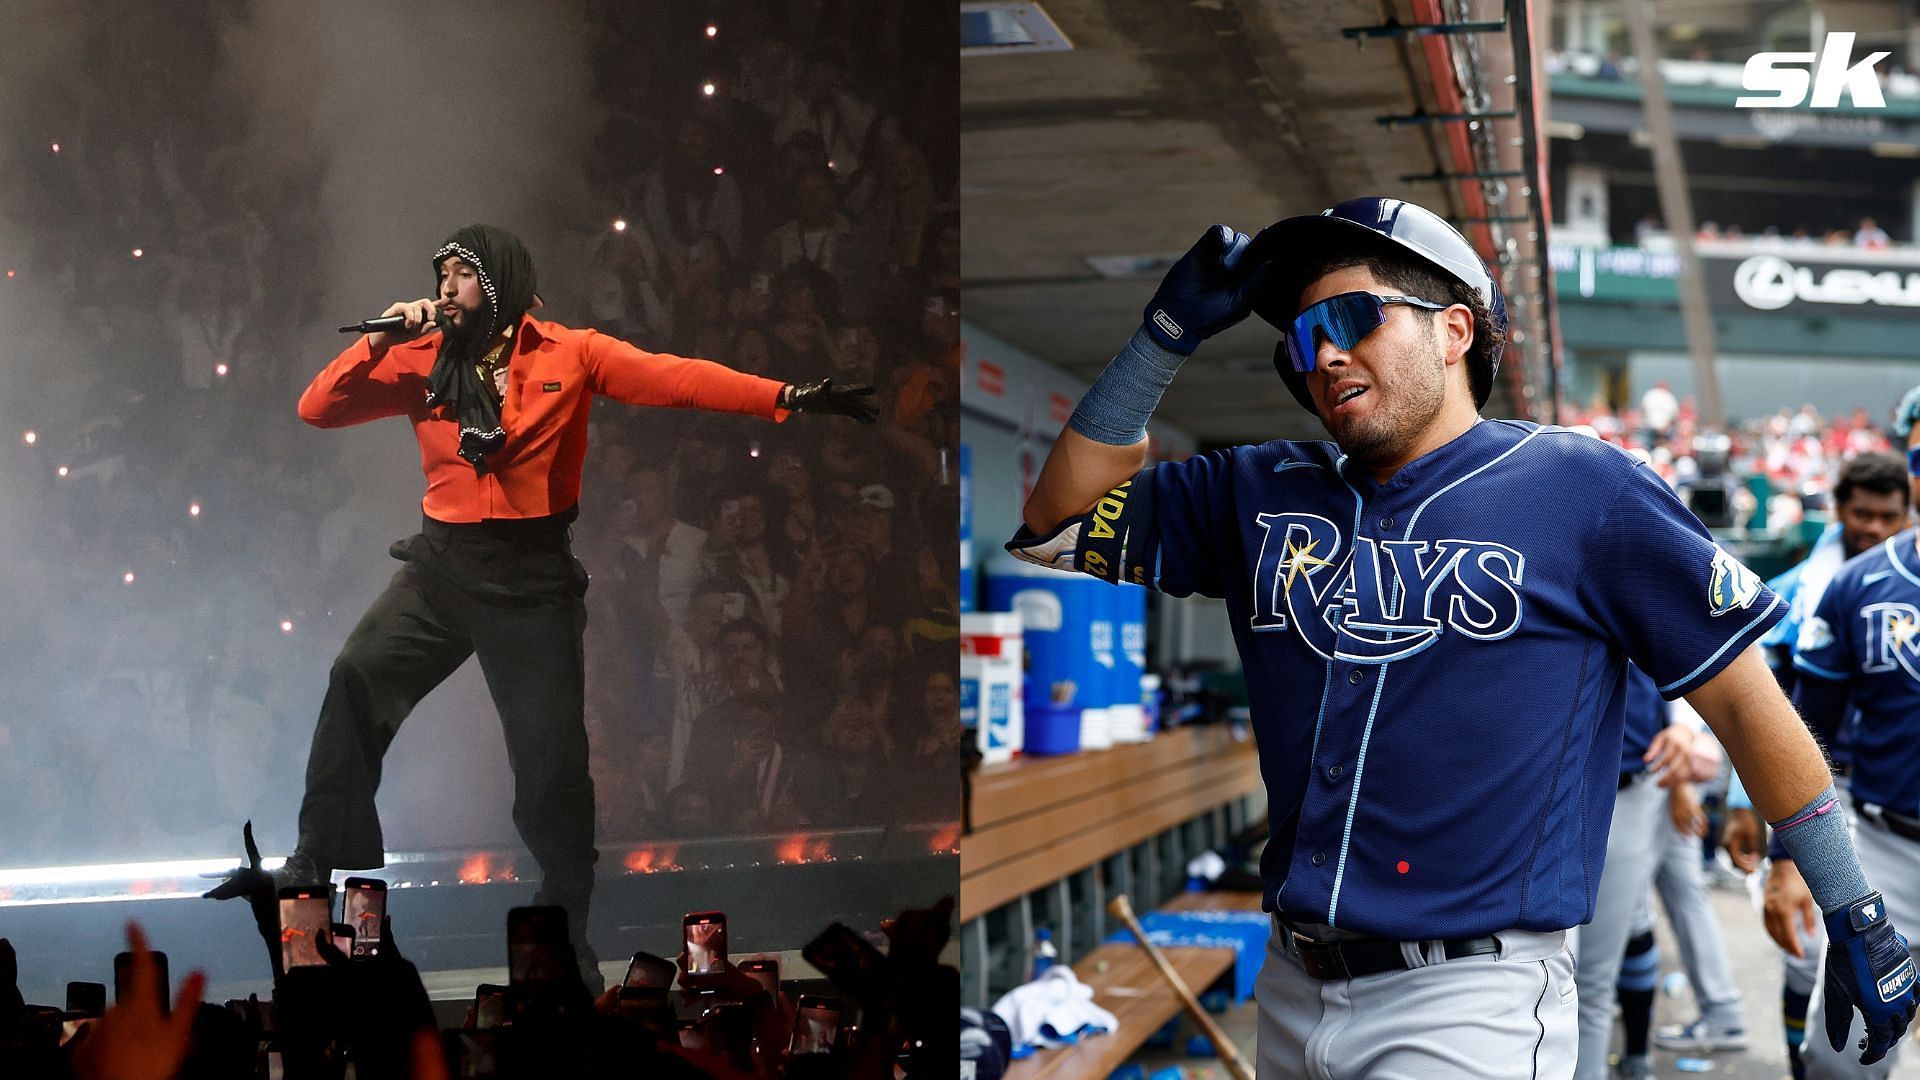 Rays player Jonathan Aranda took in a Bad Bunny concert with his wife in Tampa